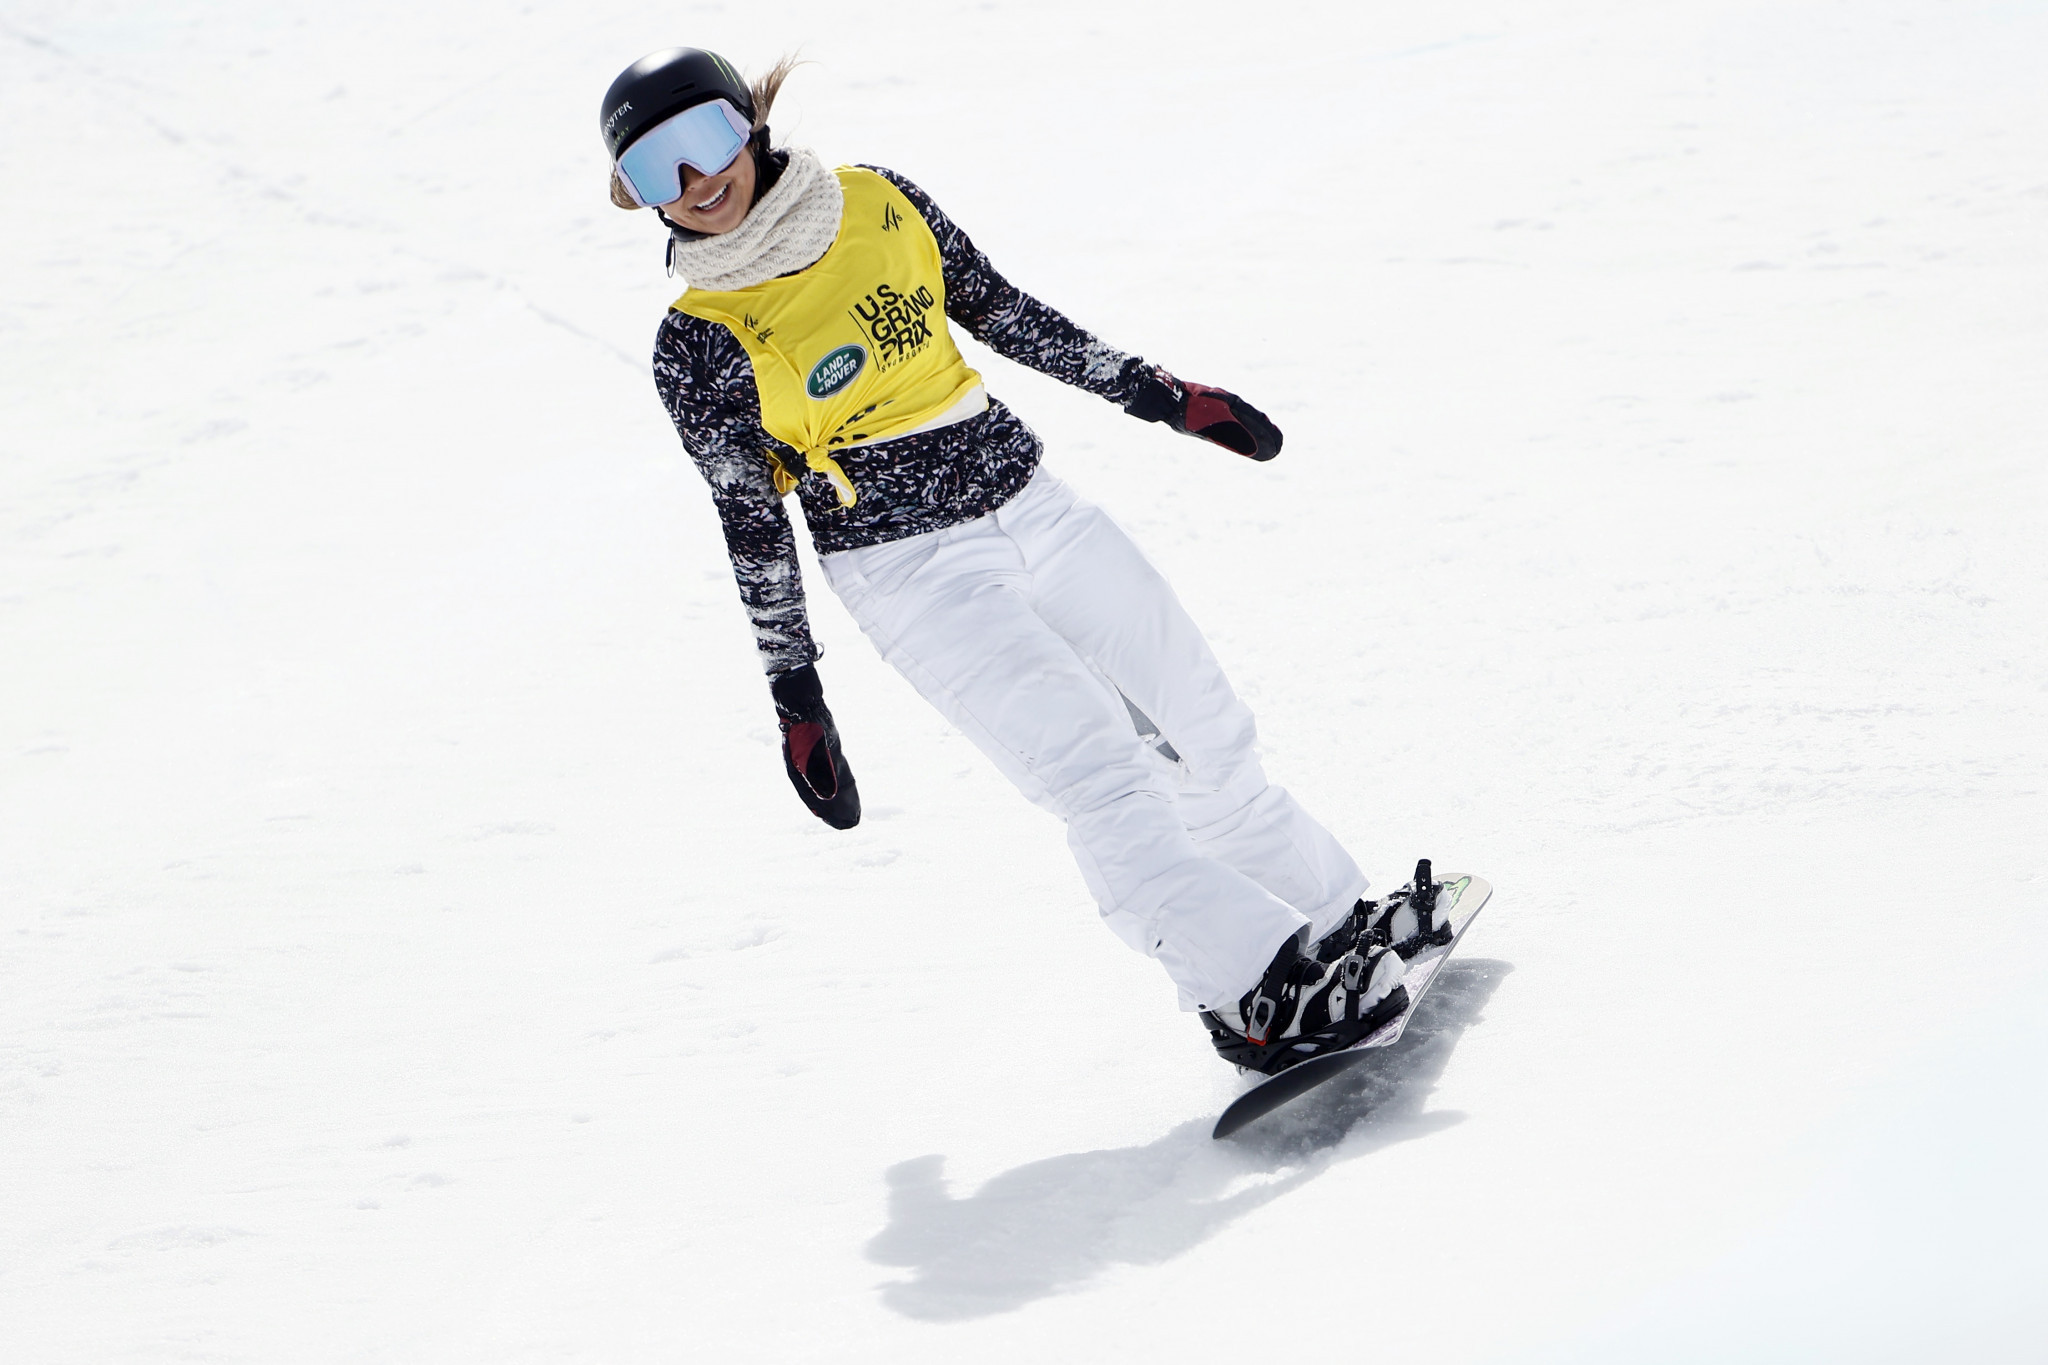 Snowboarder Chloe Kim won both of the halfpipe events last season to claim the crystal globe ©Getty Images